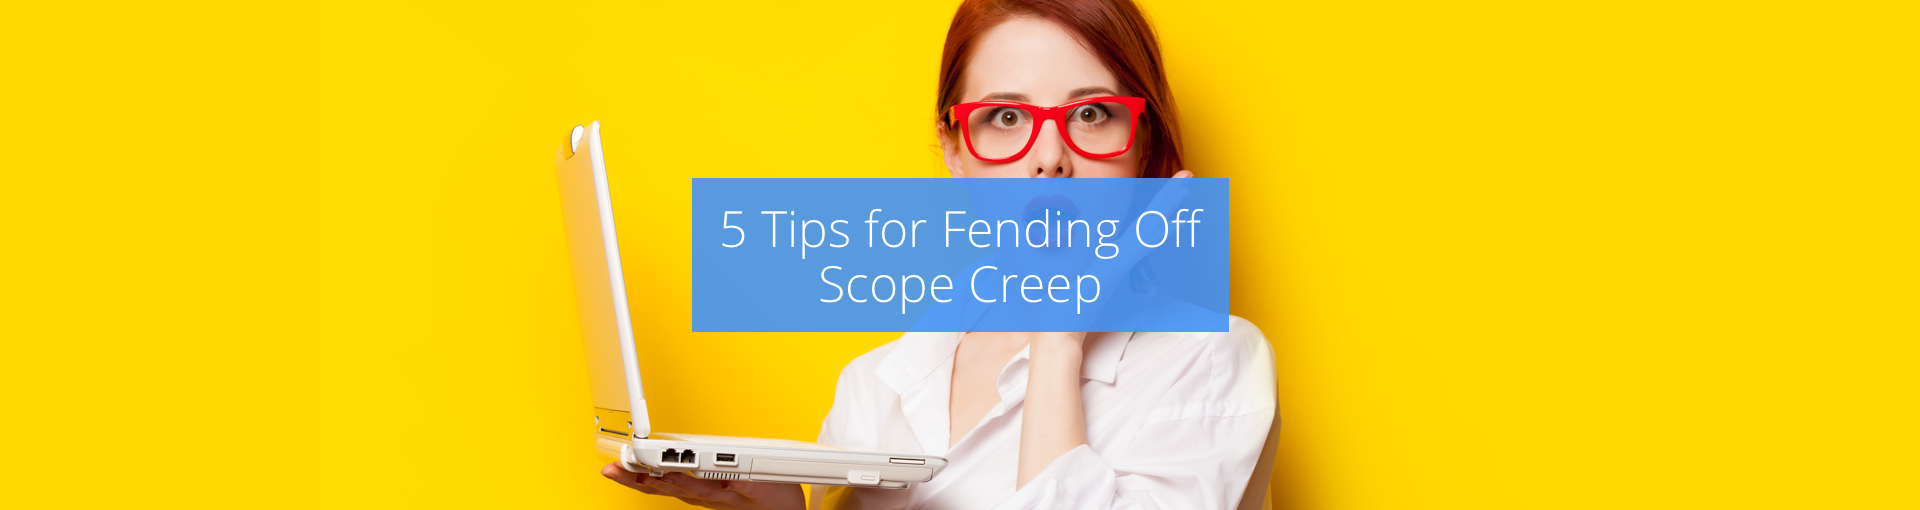 5 Tips for Fending Off Scope Creep Featured Image